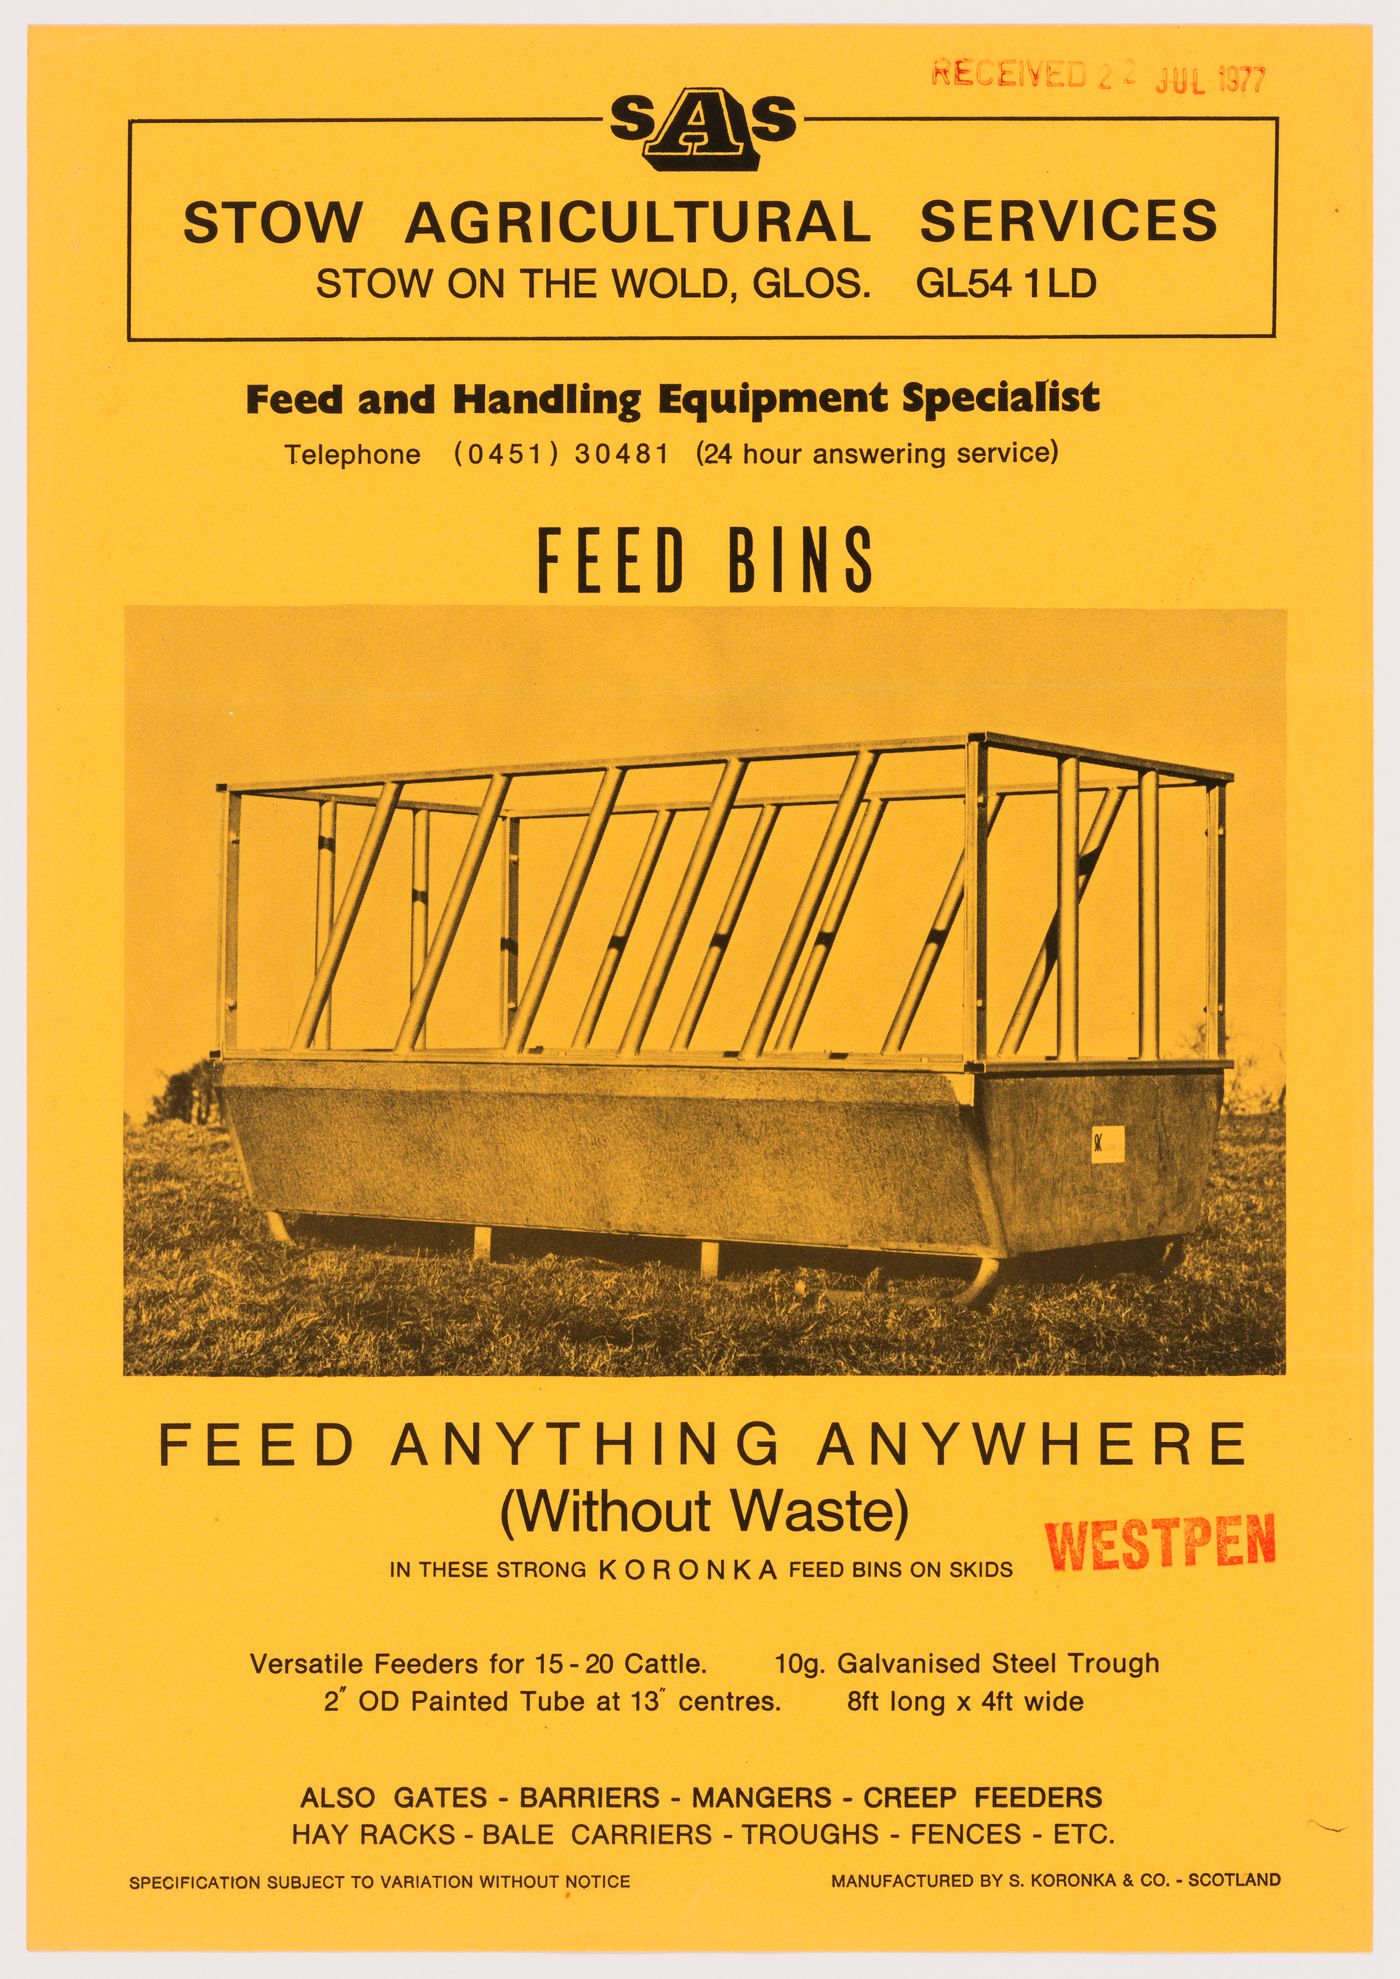 Advertisement for Koronka Feed Bins, from the project file "Westpen"